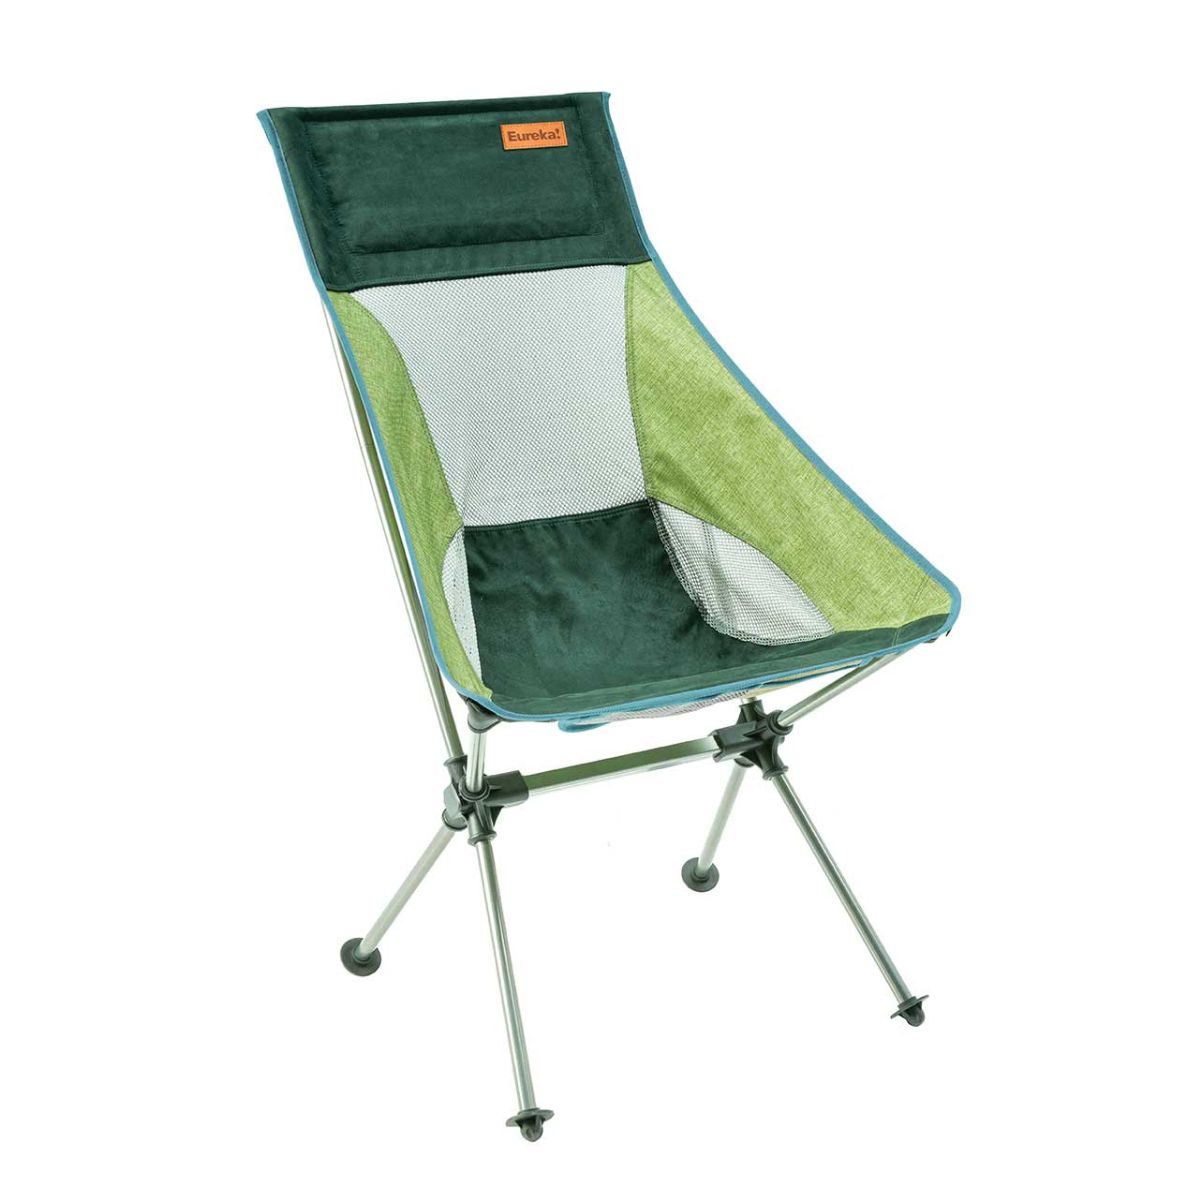 Tagalong Comfort Camp Chair